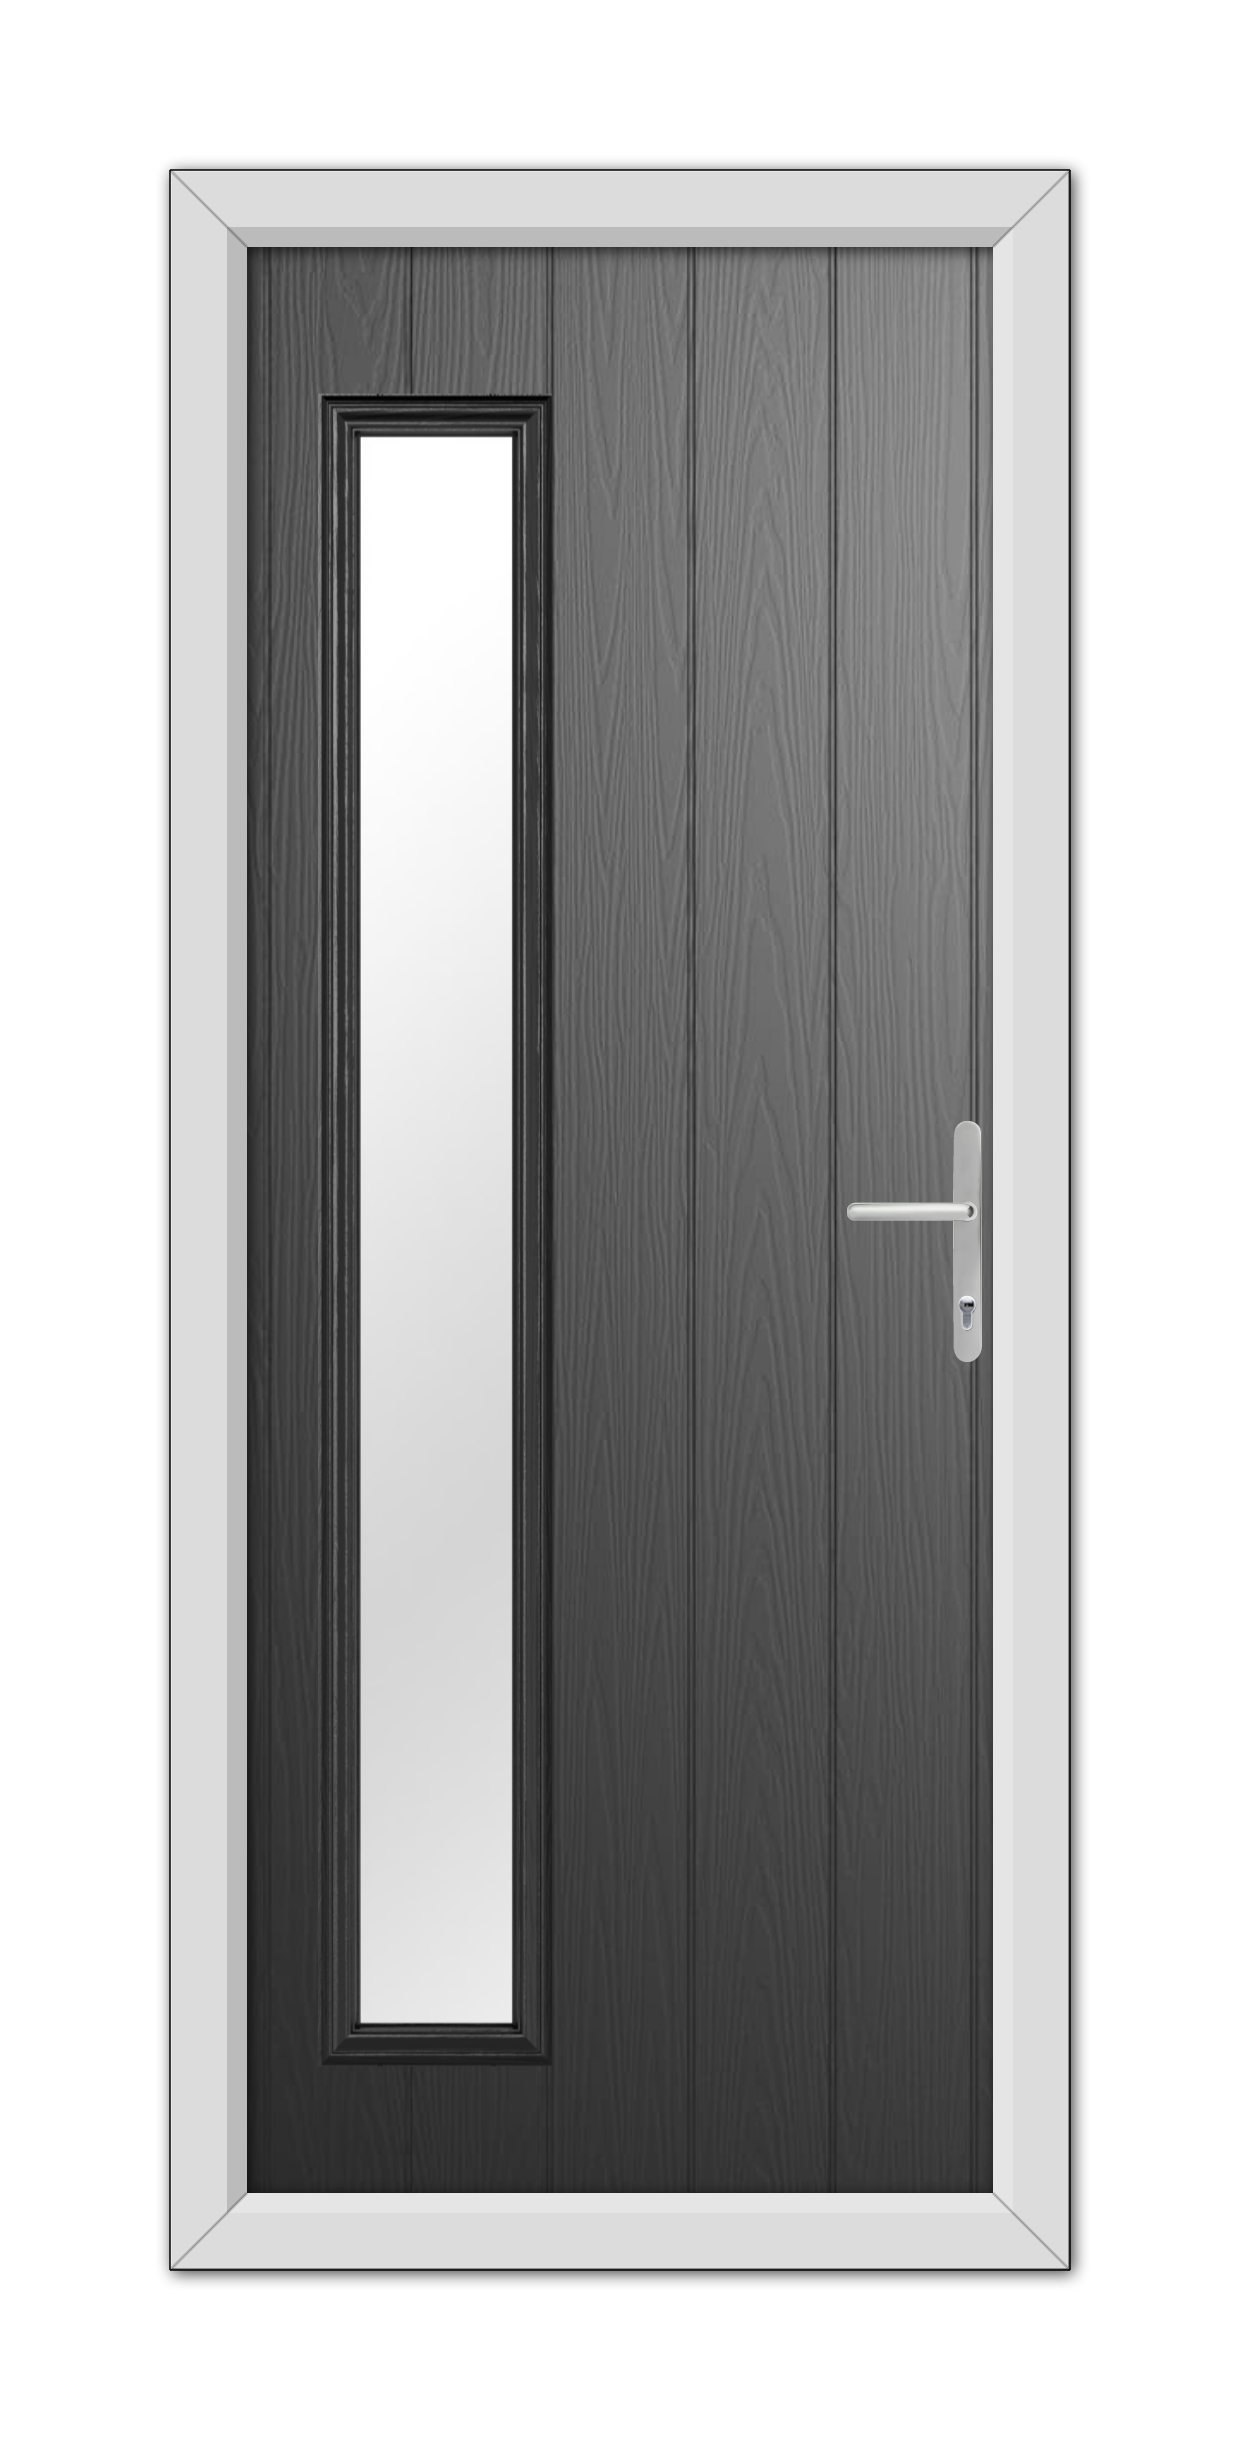 A modern Black Sutherland Composite Door 48mm Timber Core featuring a vertical rectangular window and a metal handle, set in a white frame.